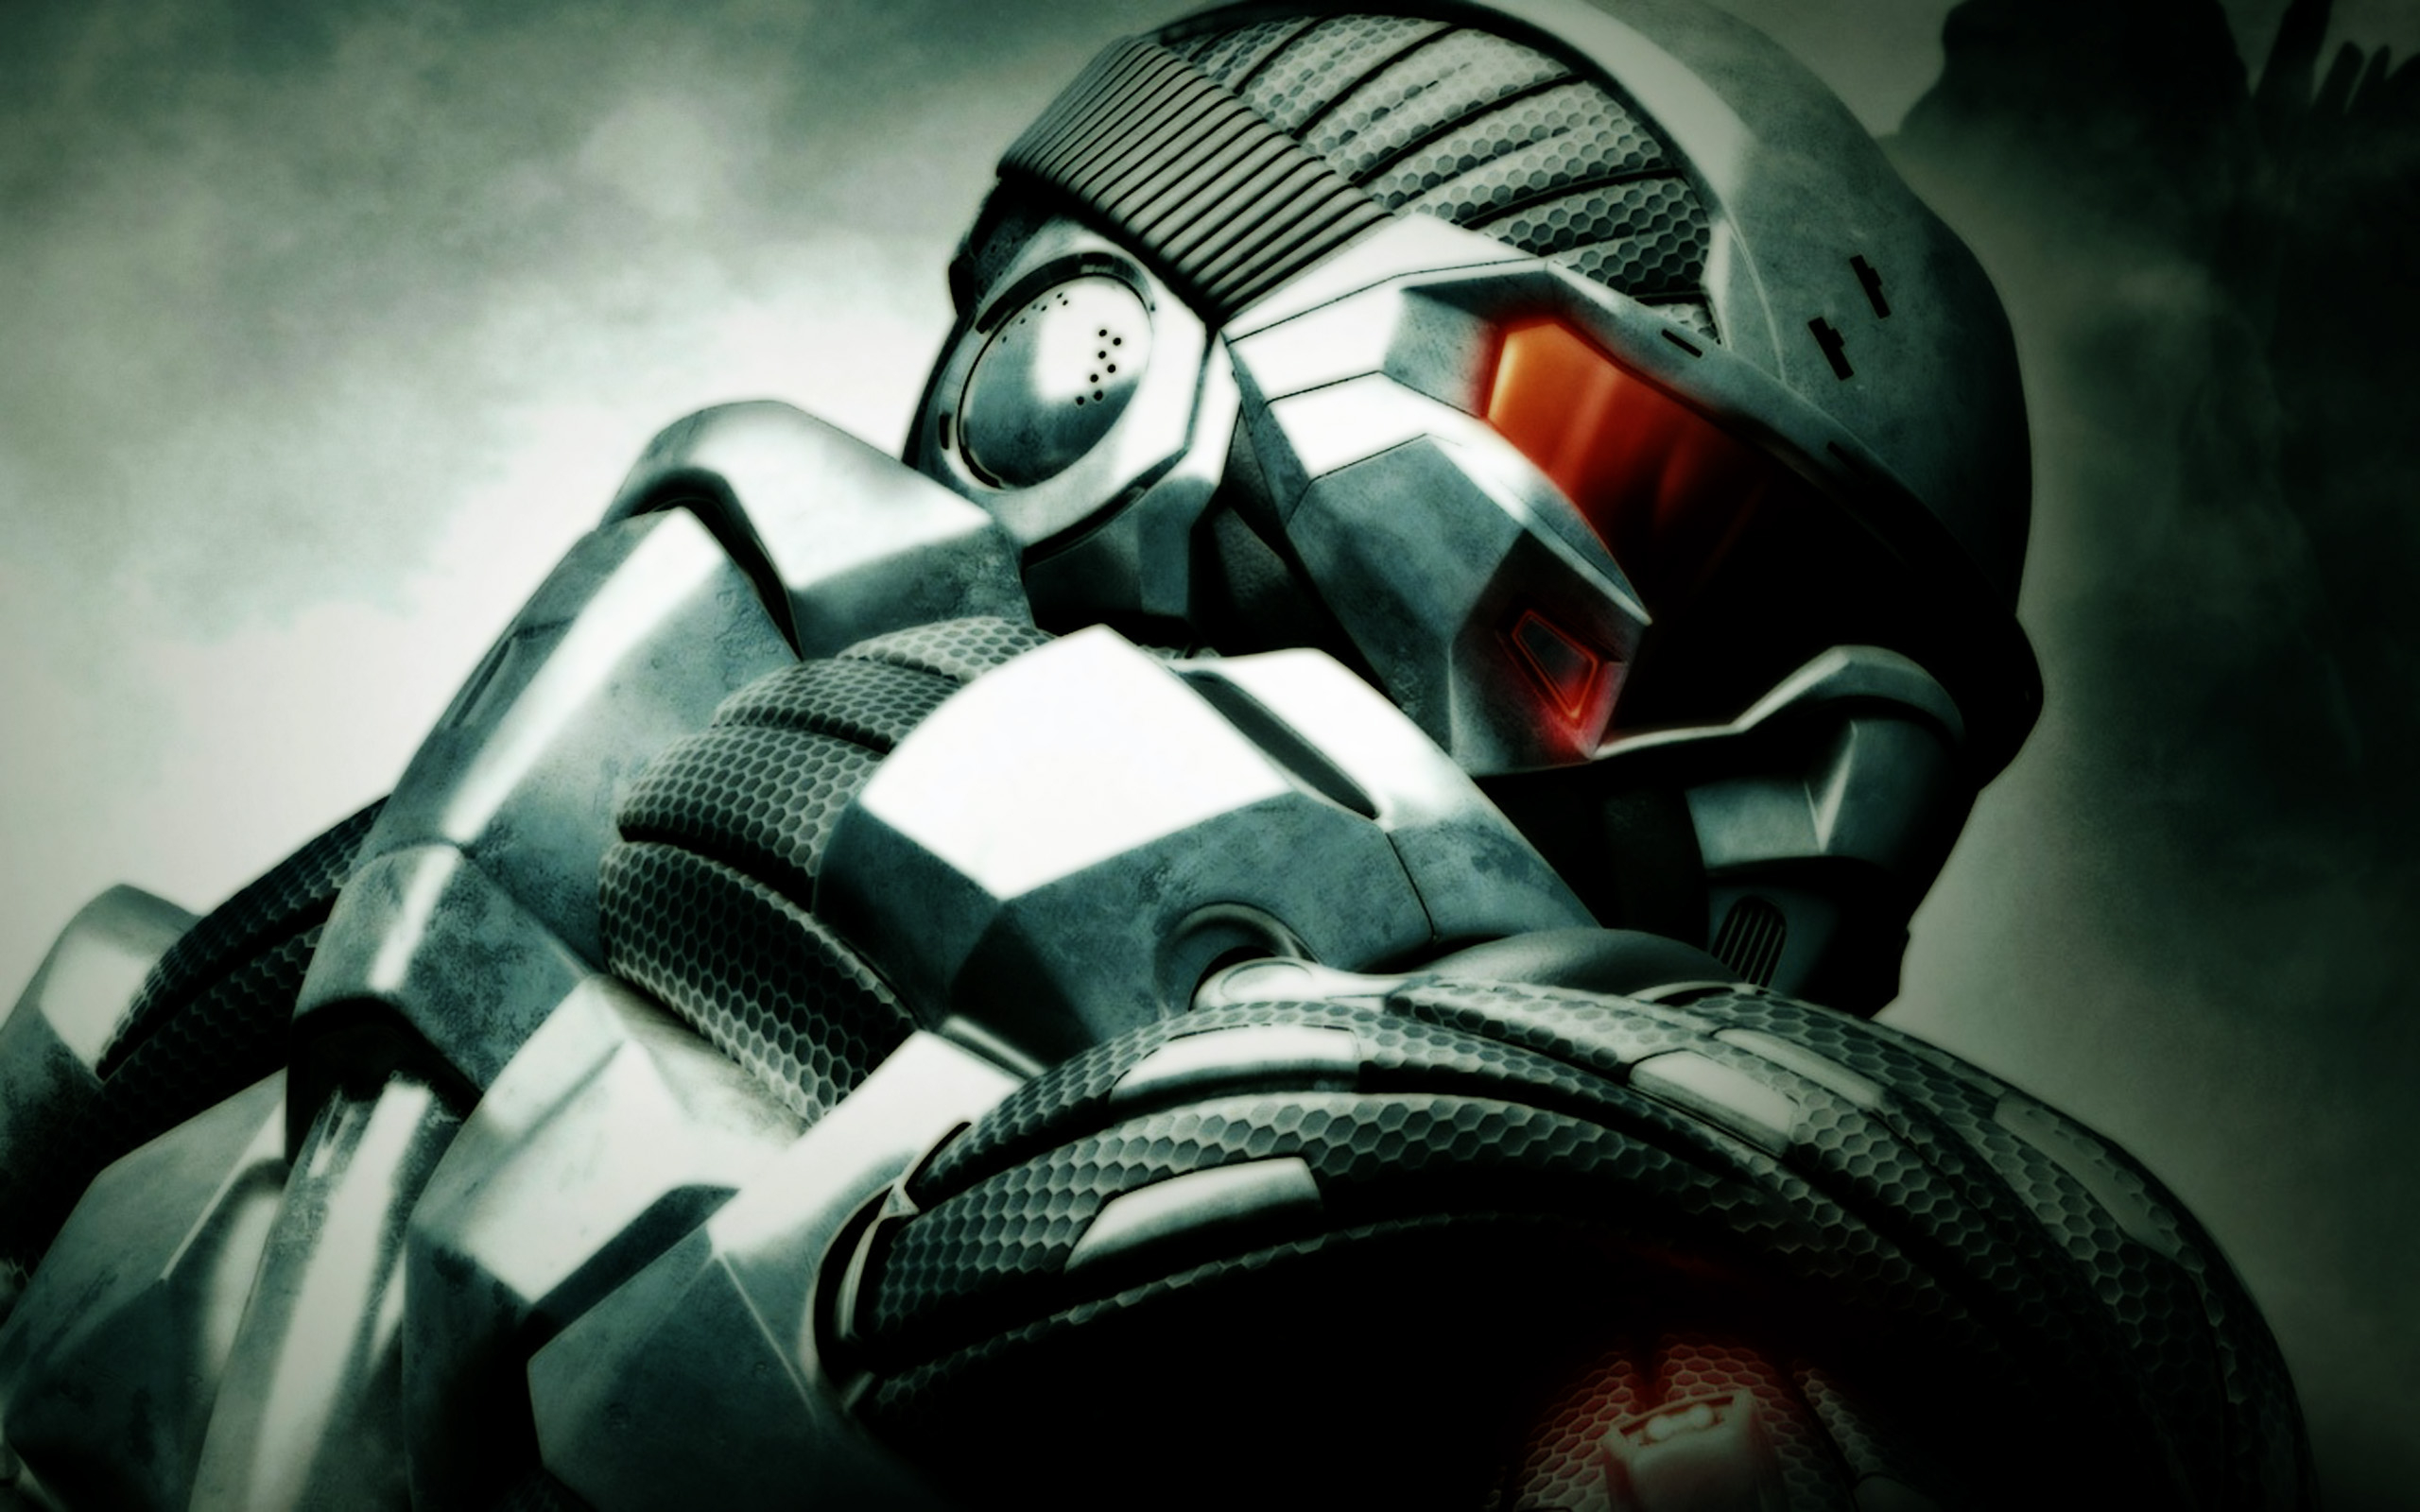 2560x1600 Awesome HD Robot Wallpapers \u0026 Backgrounds For Free Download